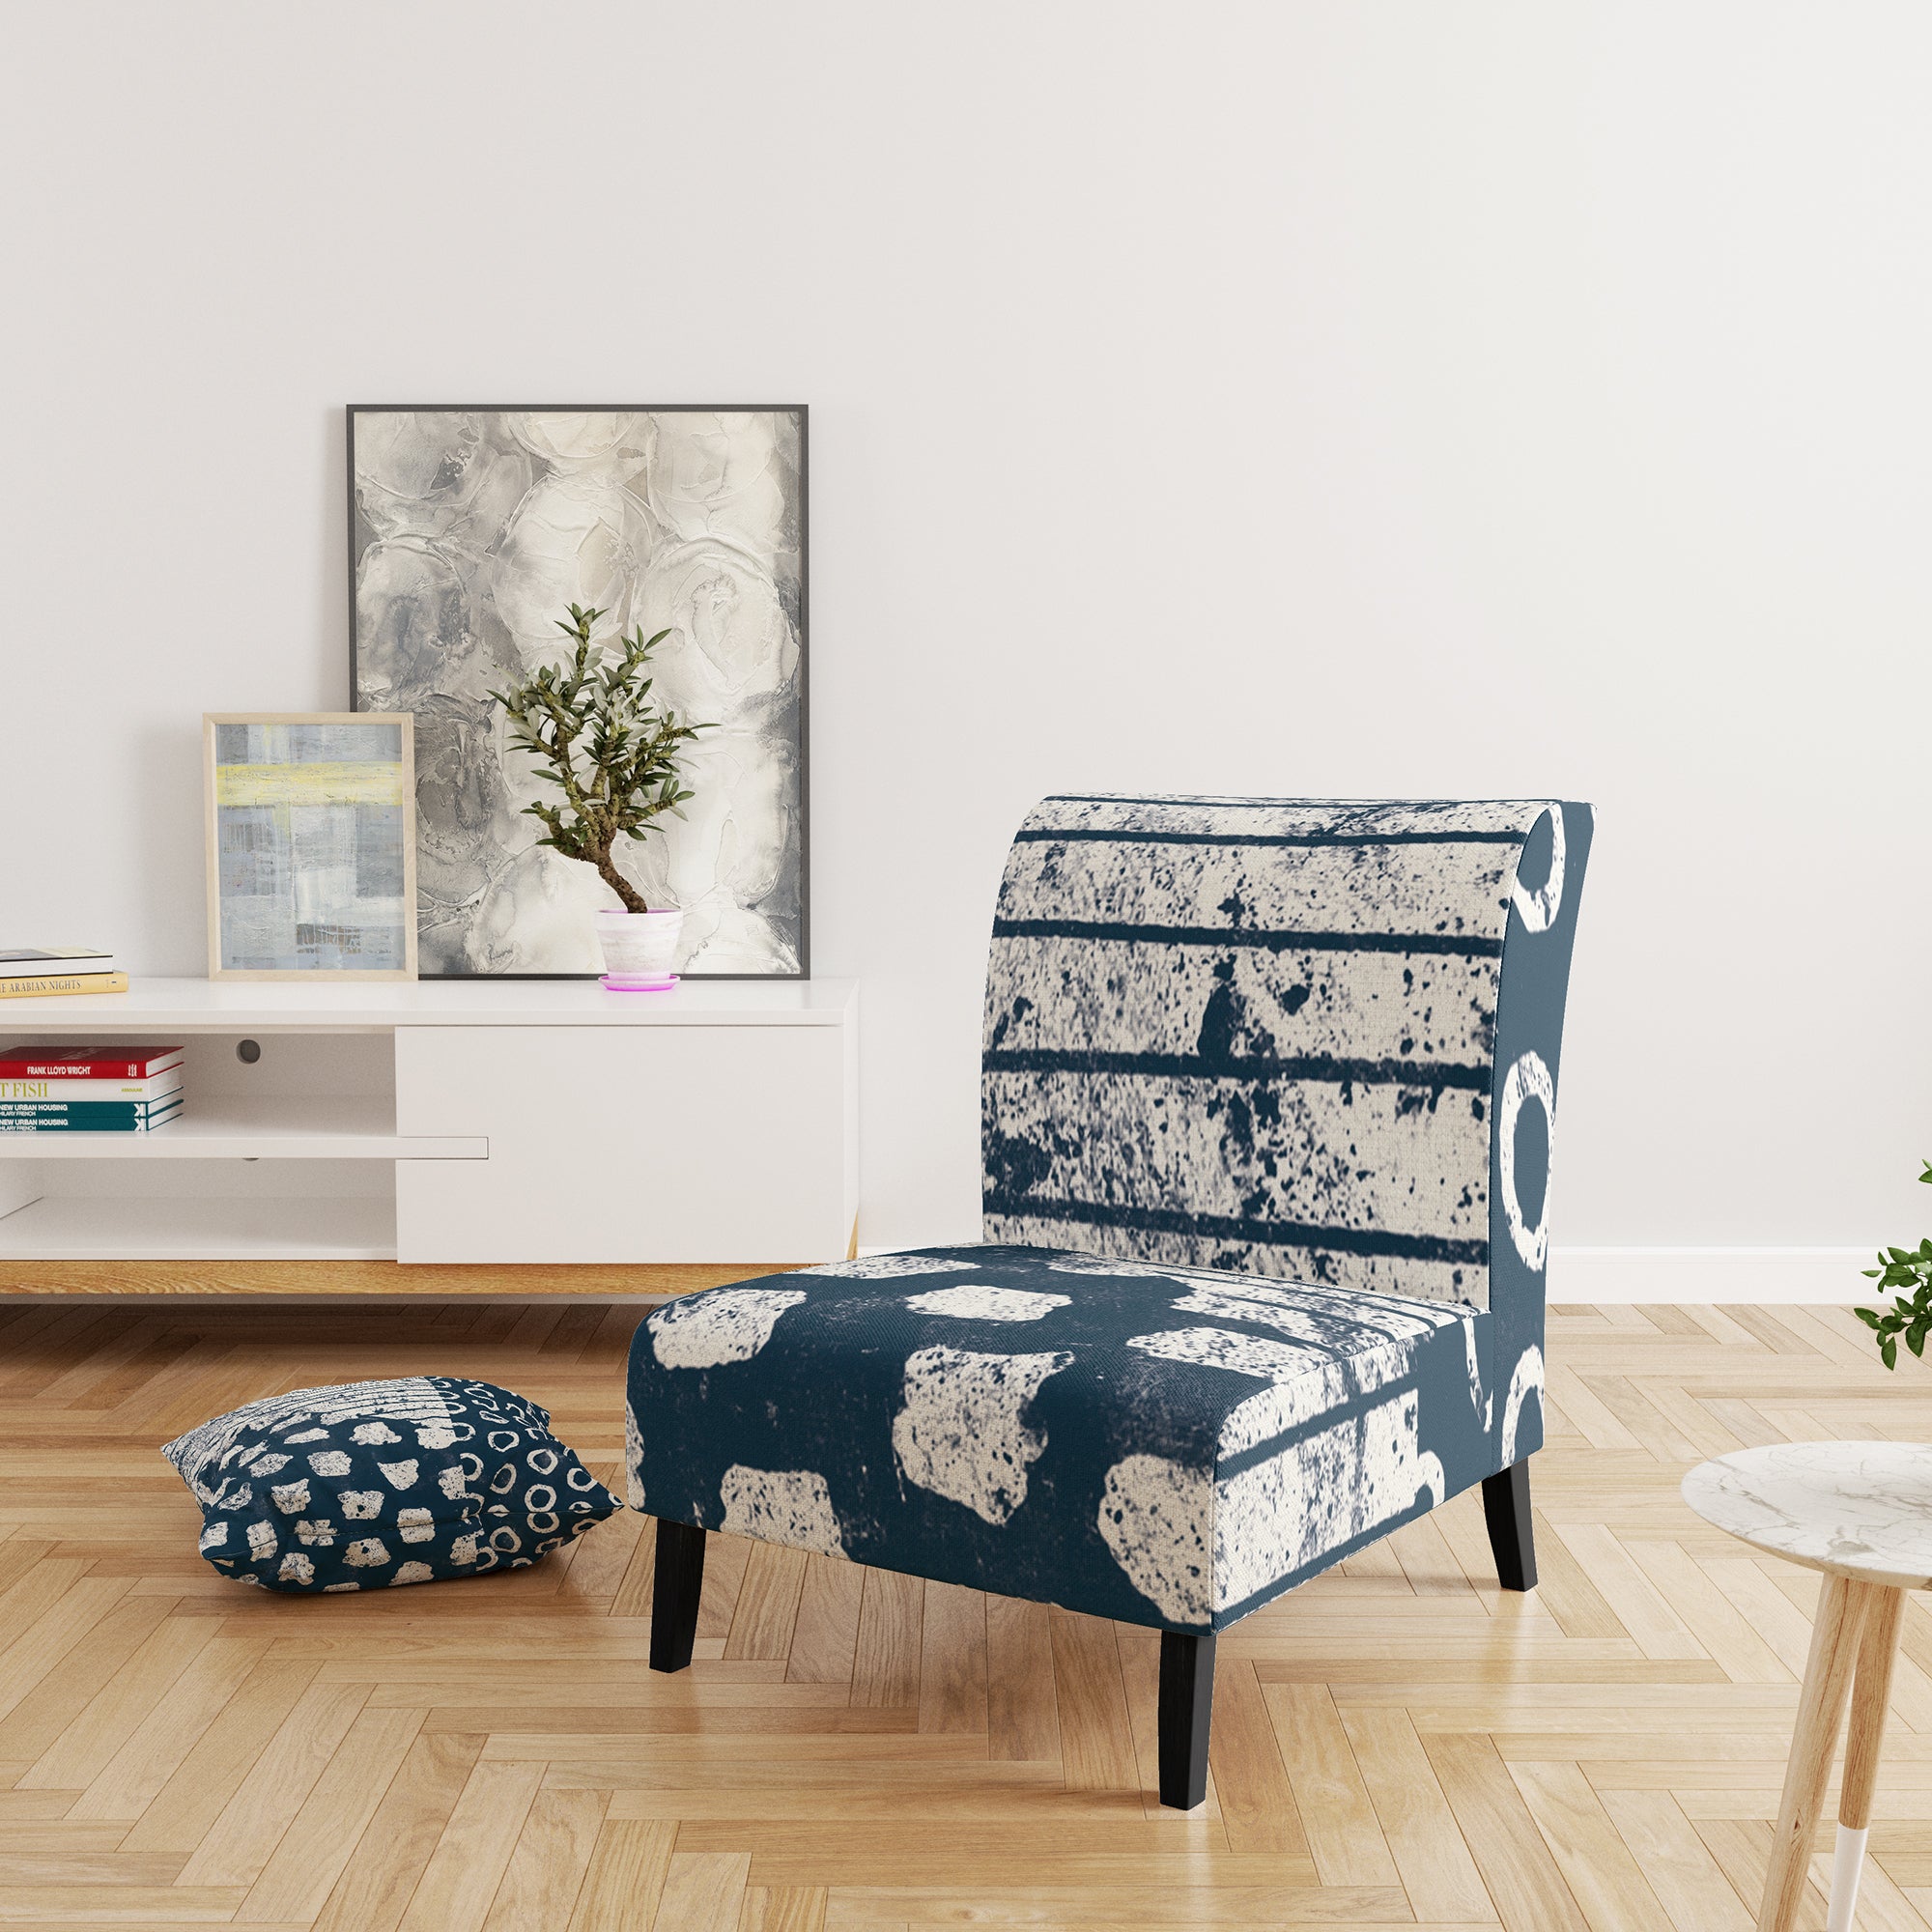 Indigo striples and Tile Modern Accent Chair